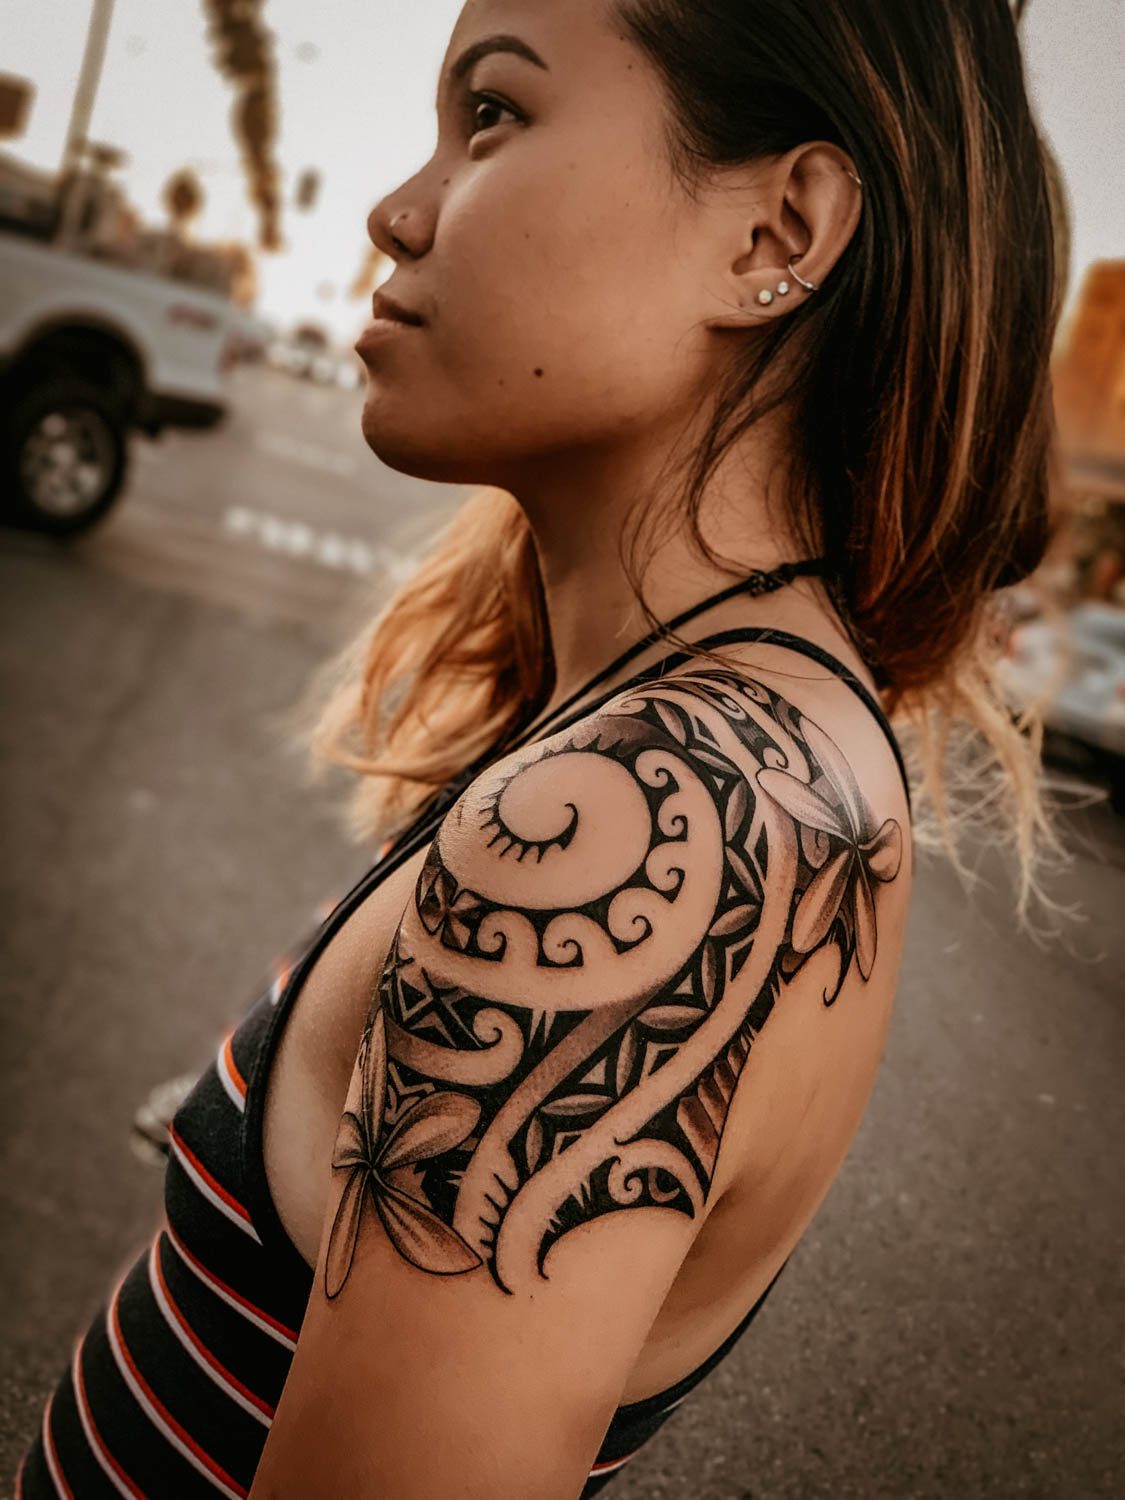 polynesian tattoo meanings and symbols